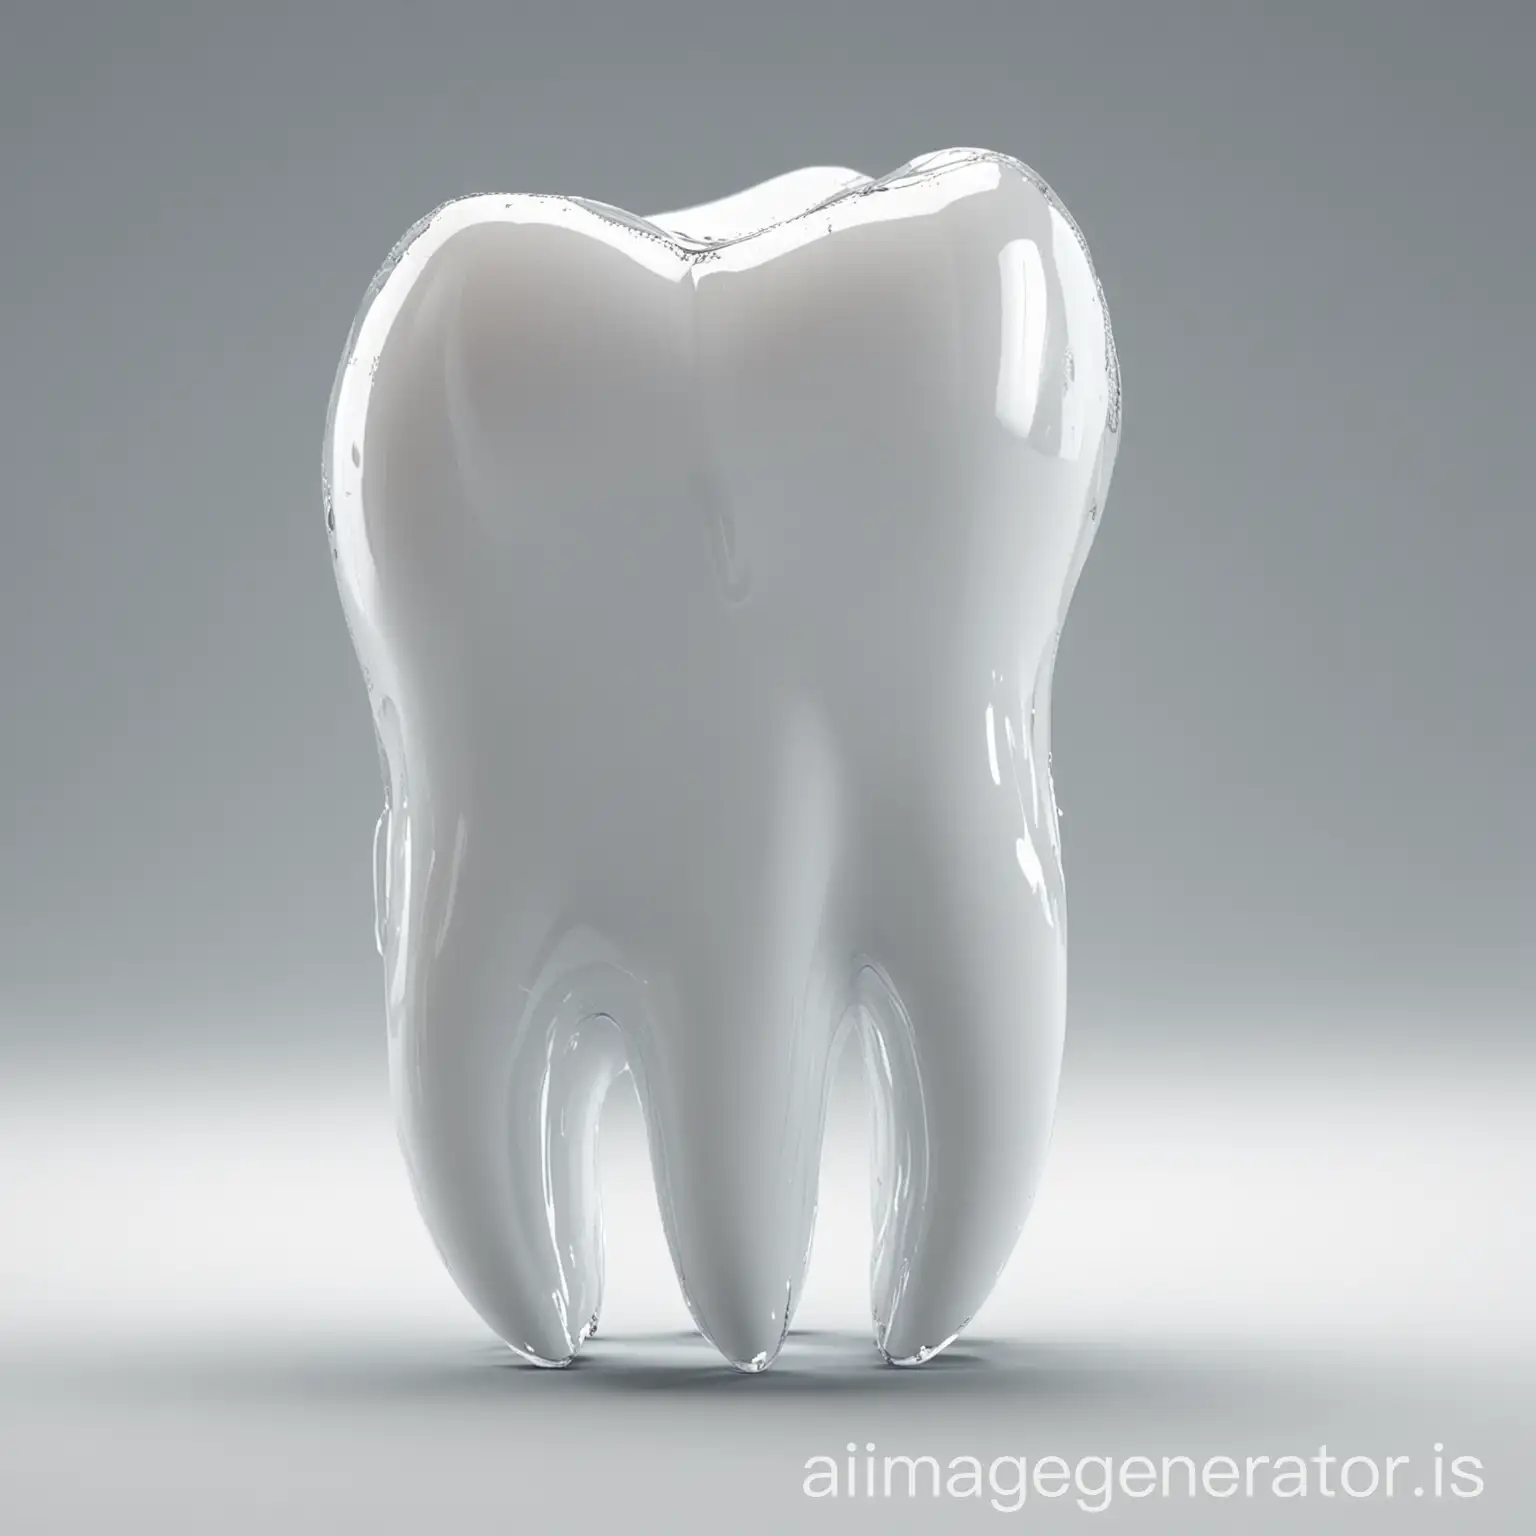 single tooth, white, bright, clean, transparent, c4d